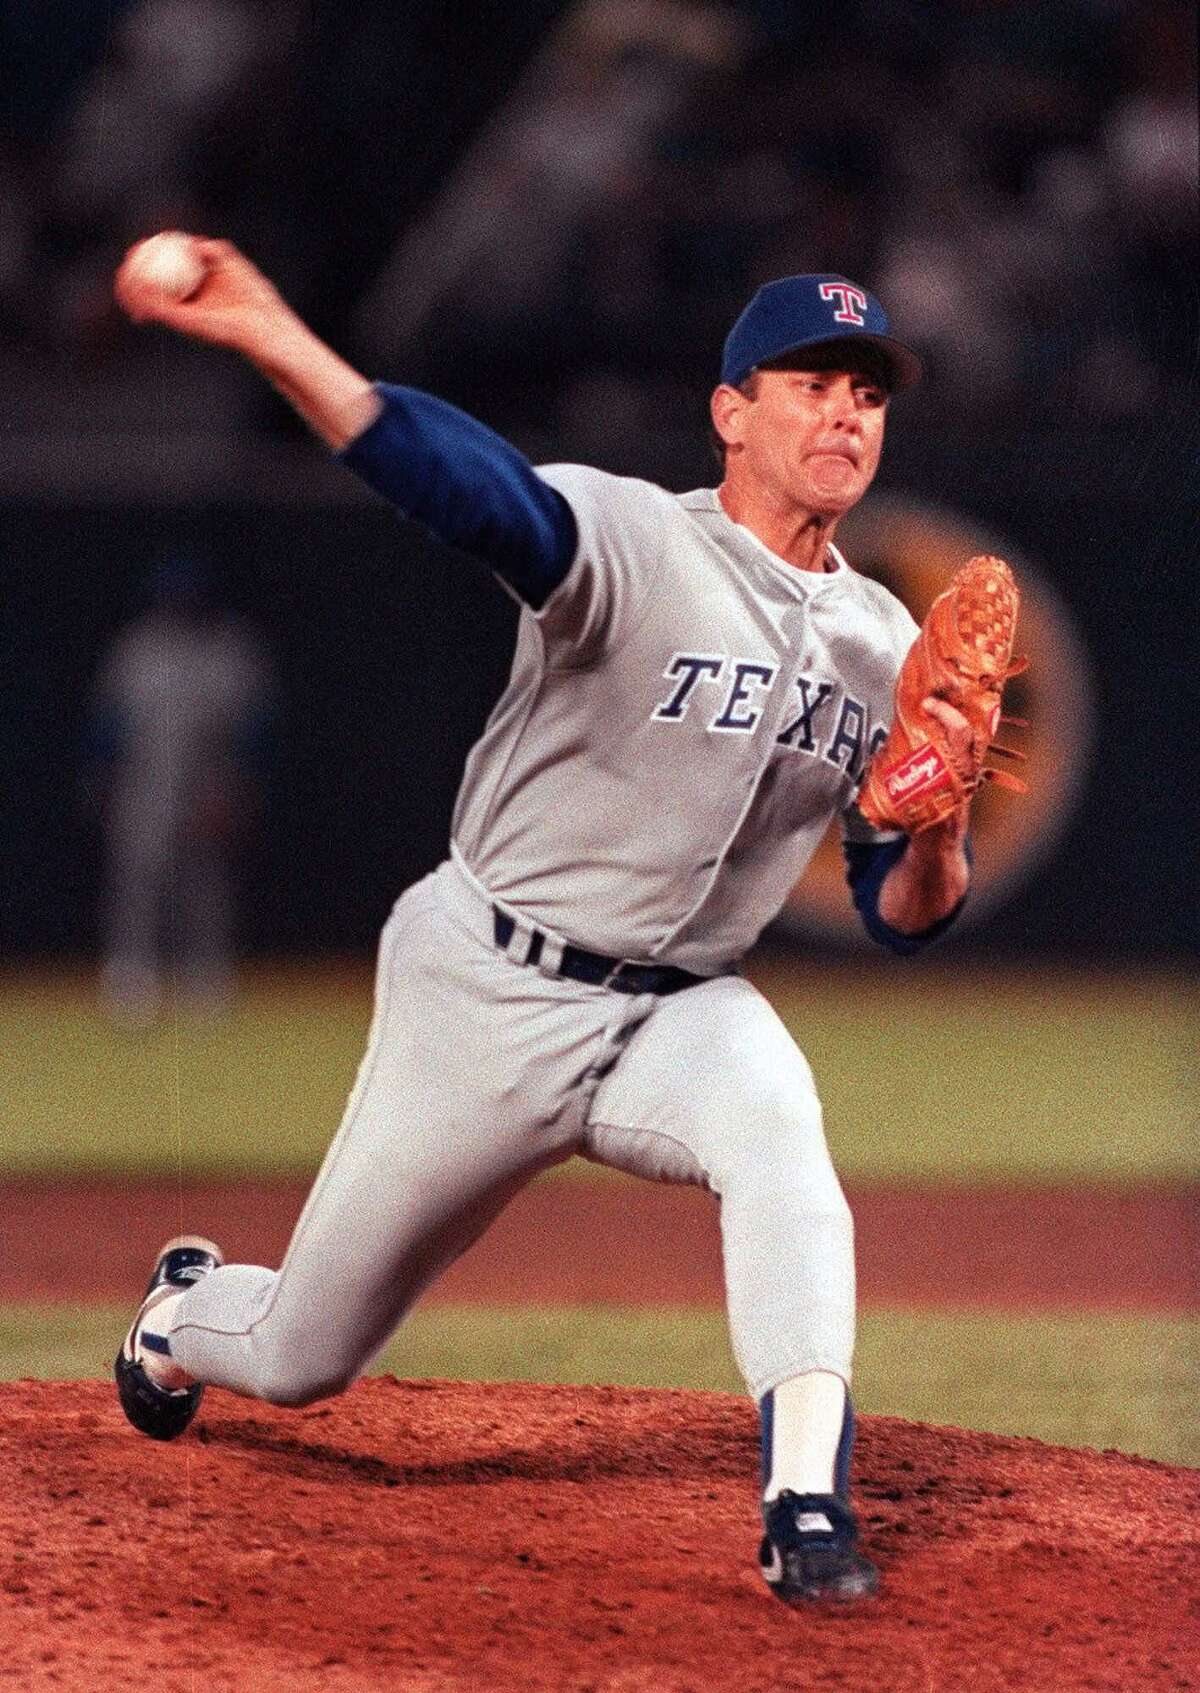 Texas Ranger's pitcher Nolan Ryan pitches during his sixth career no-hitter at the Oakland Coliseum in Oakland, Calif, in this June 11, 1990 file photo. Ryan became the oldest man to pitch a no-hitter, the only person to pitch a no-hitter for three teams, and the only one to pitch a no-hitter in three different decades. Ryan will be inducted into the Baseball Hall of Fame in Cooperstown, N.Y., July 25. (AP Photo/File)